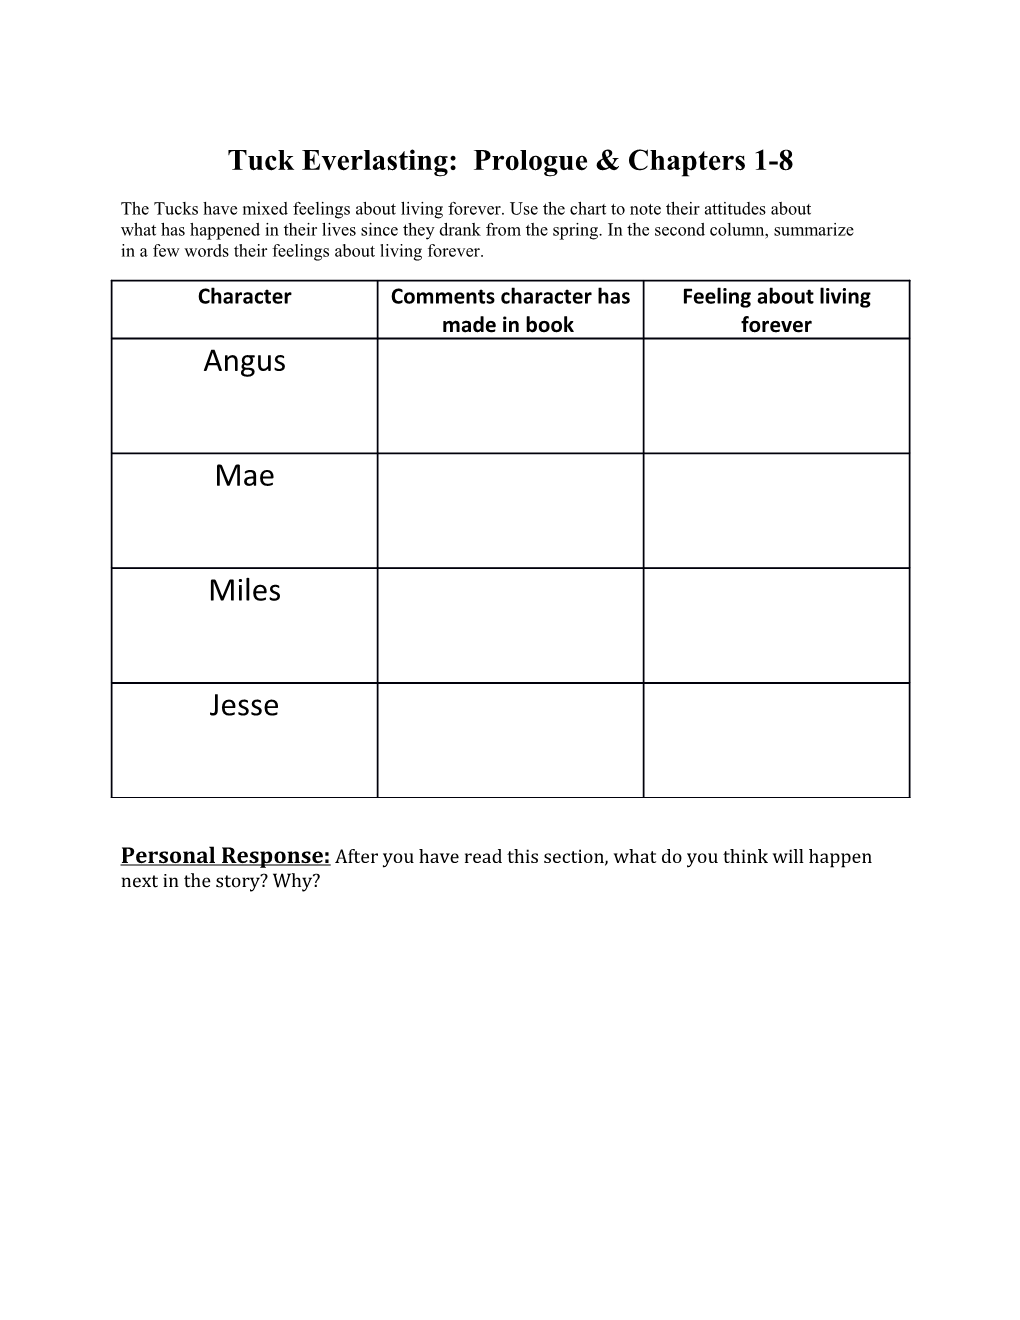 Tuck Everlasting: Prologue & Chapters 1-8